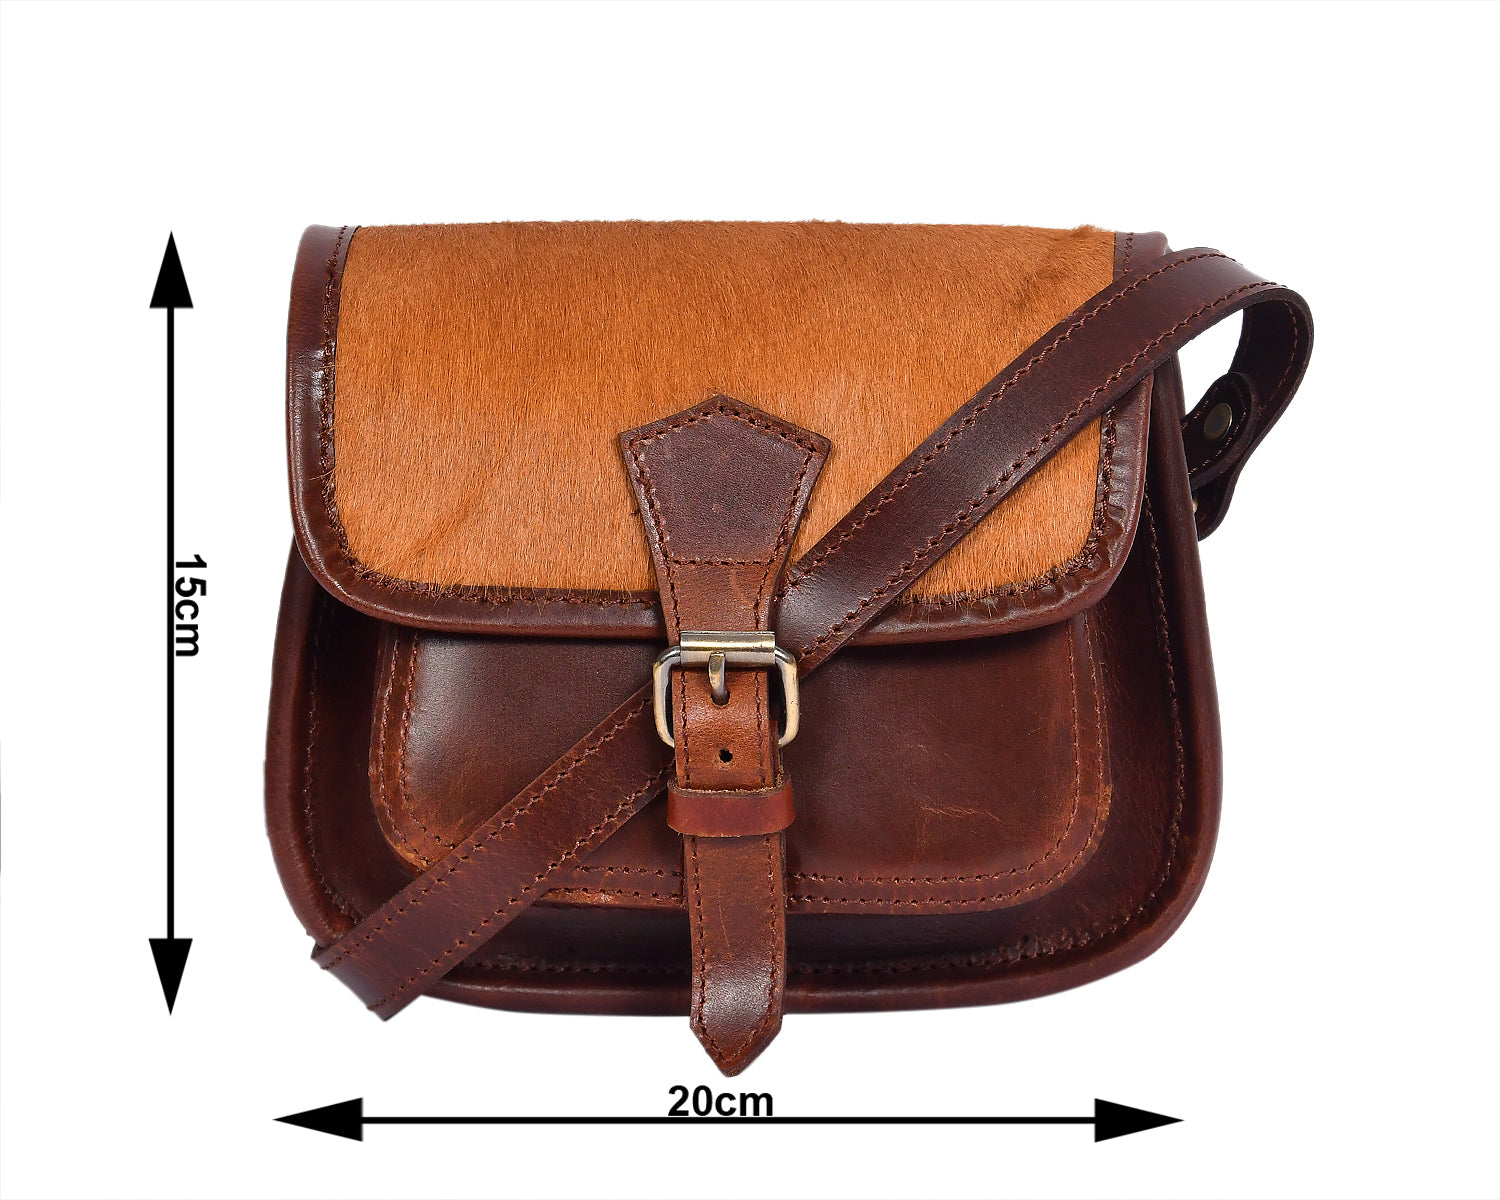 Elegant Brown Hair on Leather Sling Bag: Stylish and Functional. - CELTICINDIA